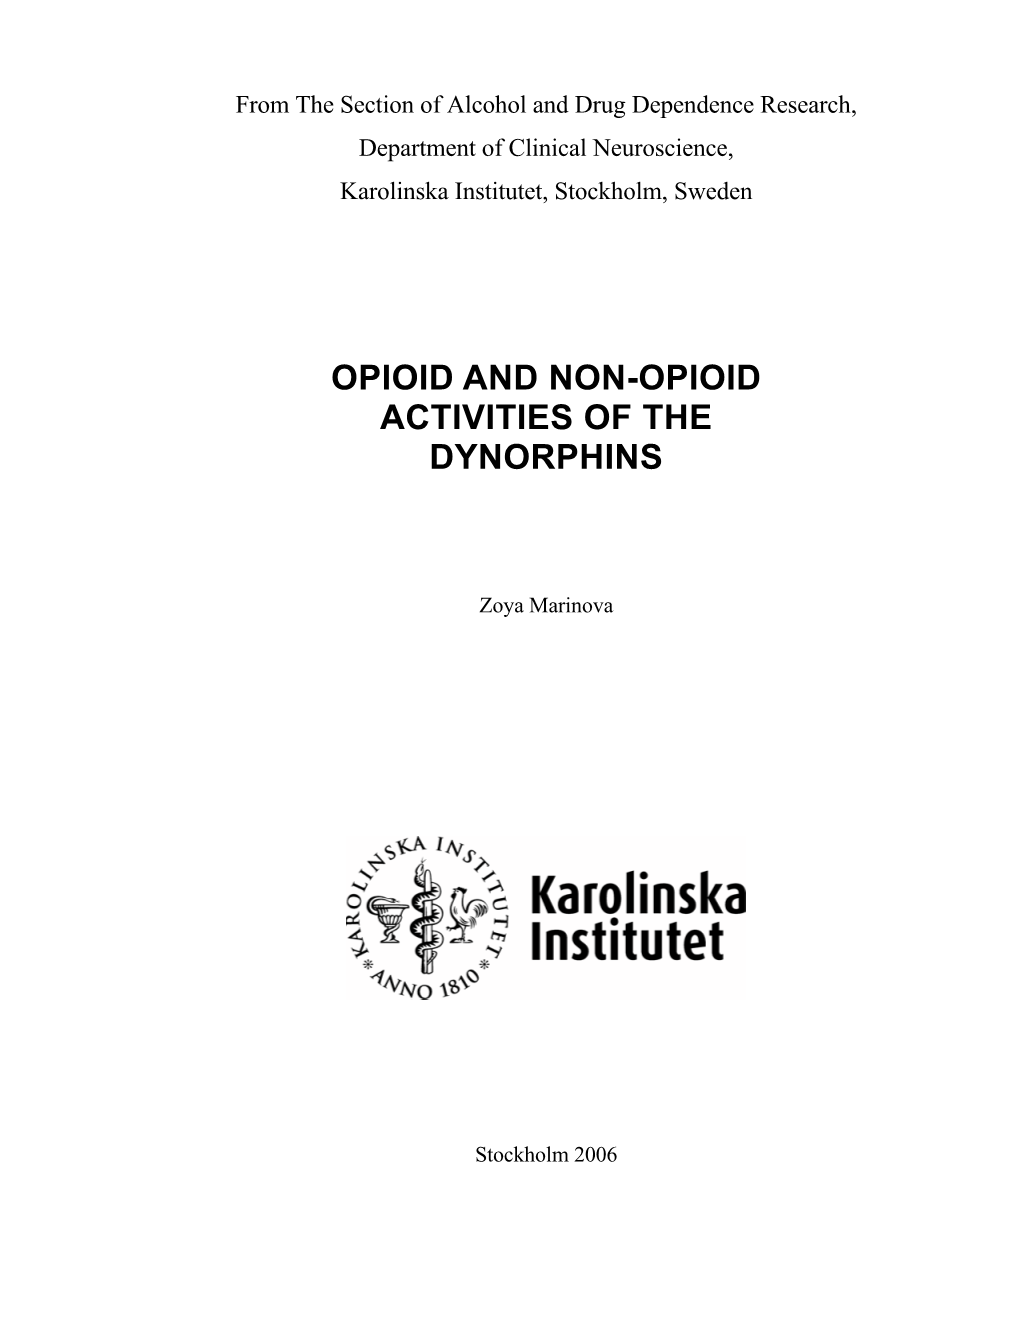 Opioid and Non-Opioid Activities of the Dynorphins